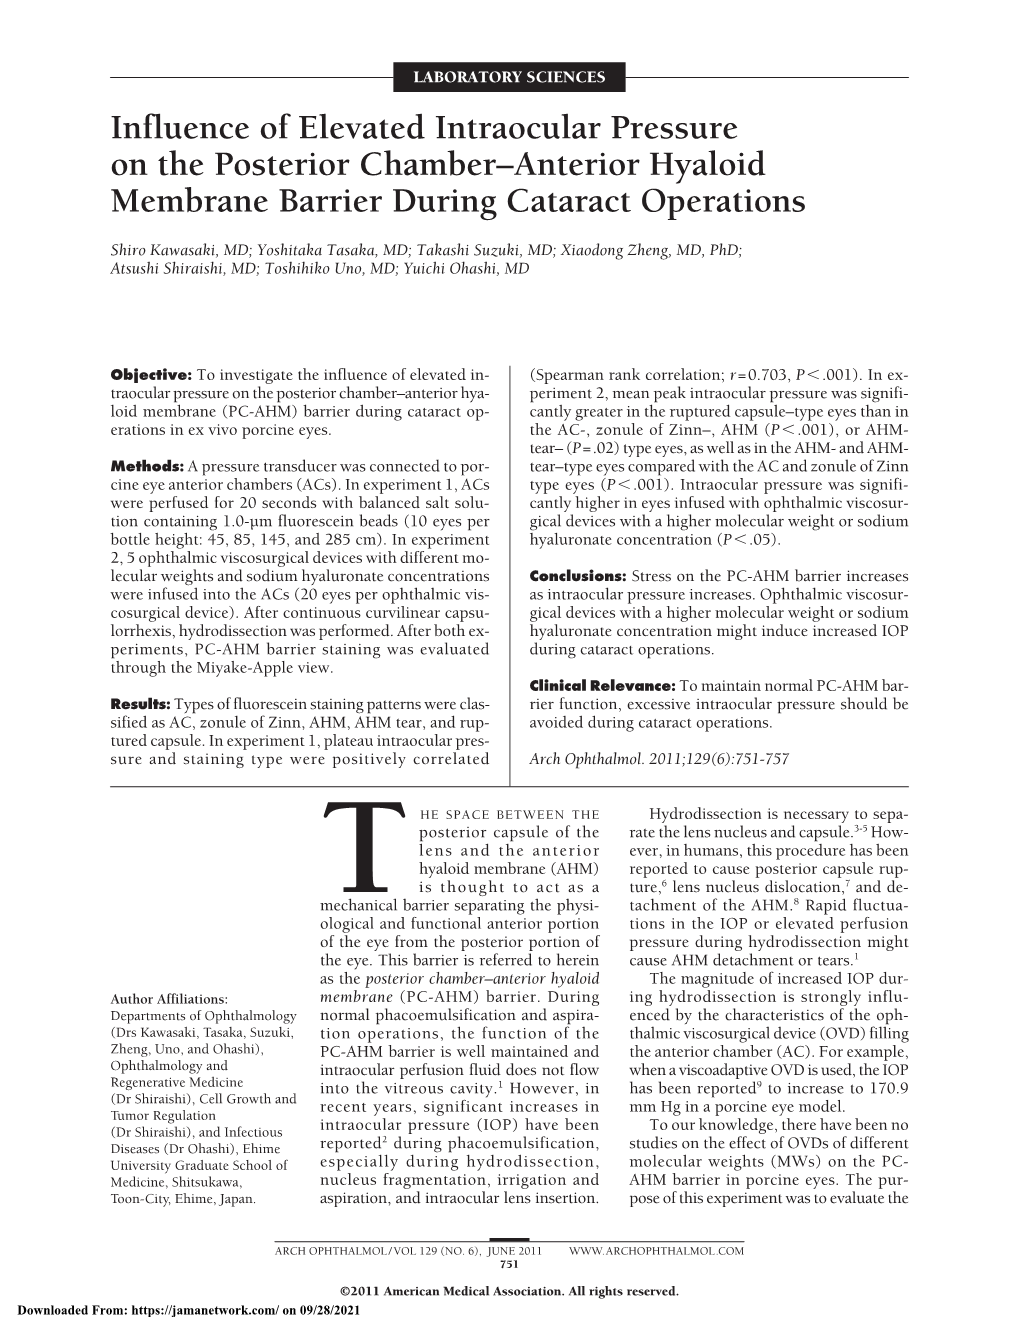 Influence of Elevated Intraocular Pressure on the Posterior Chamber–Anterior Hyaloid Membrane Barrier During Cataract Operations